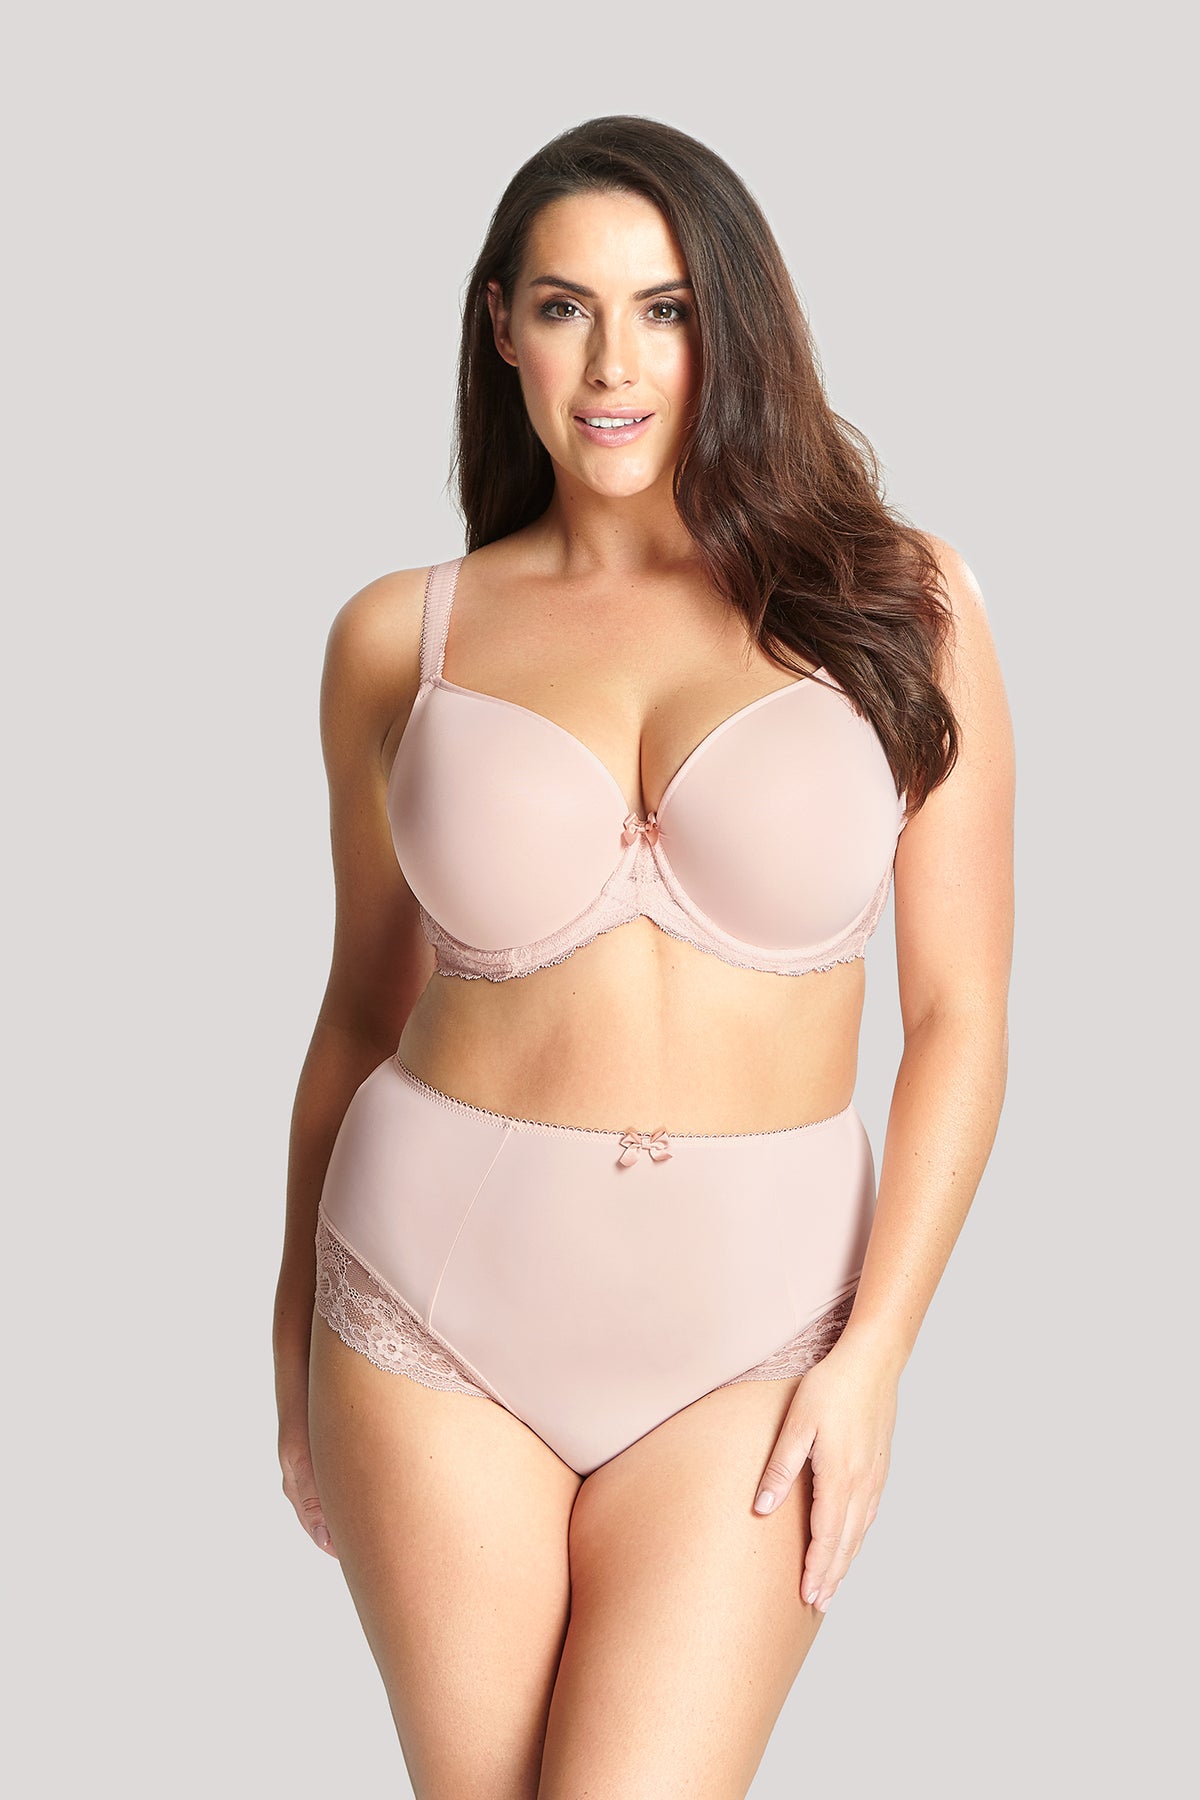 Panache Sculptresse Sasha Plunge Moulded Padded Wired Bra 9506 Soft Pink Full Length